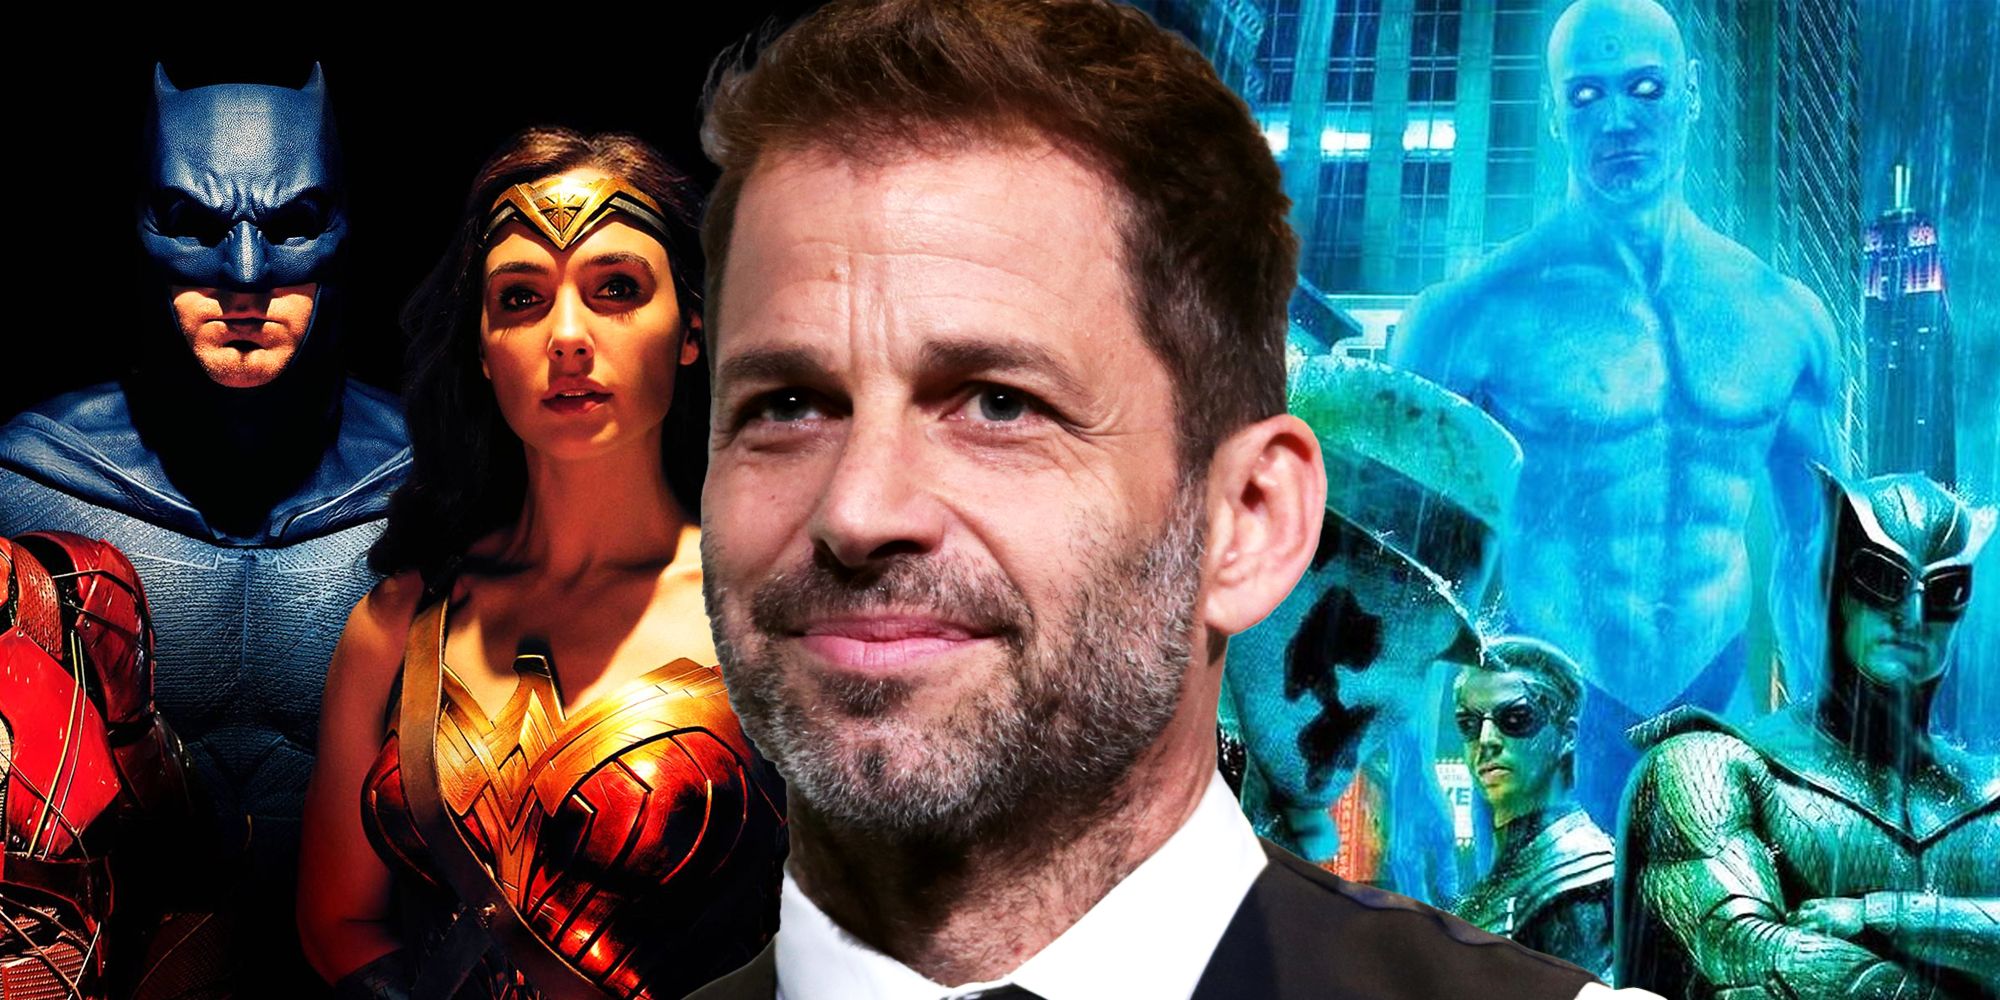 Zack Snyder and his comic book movies